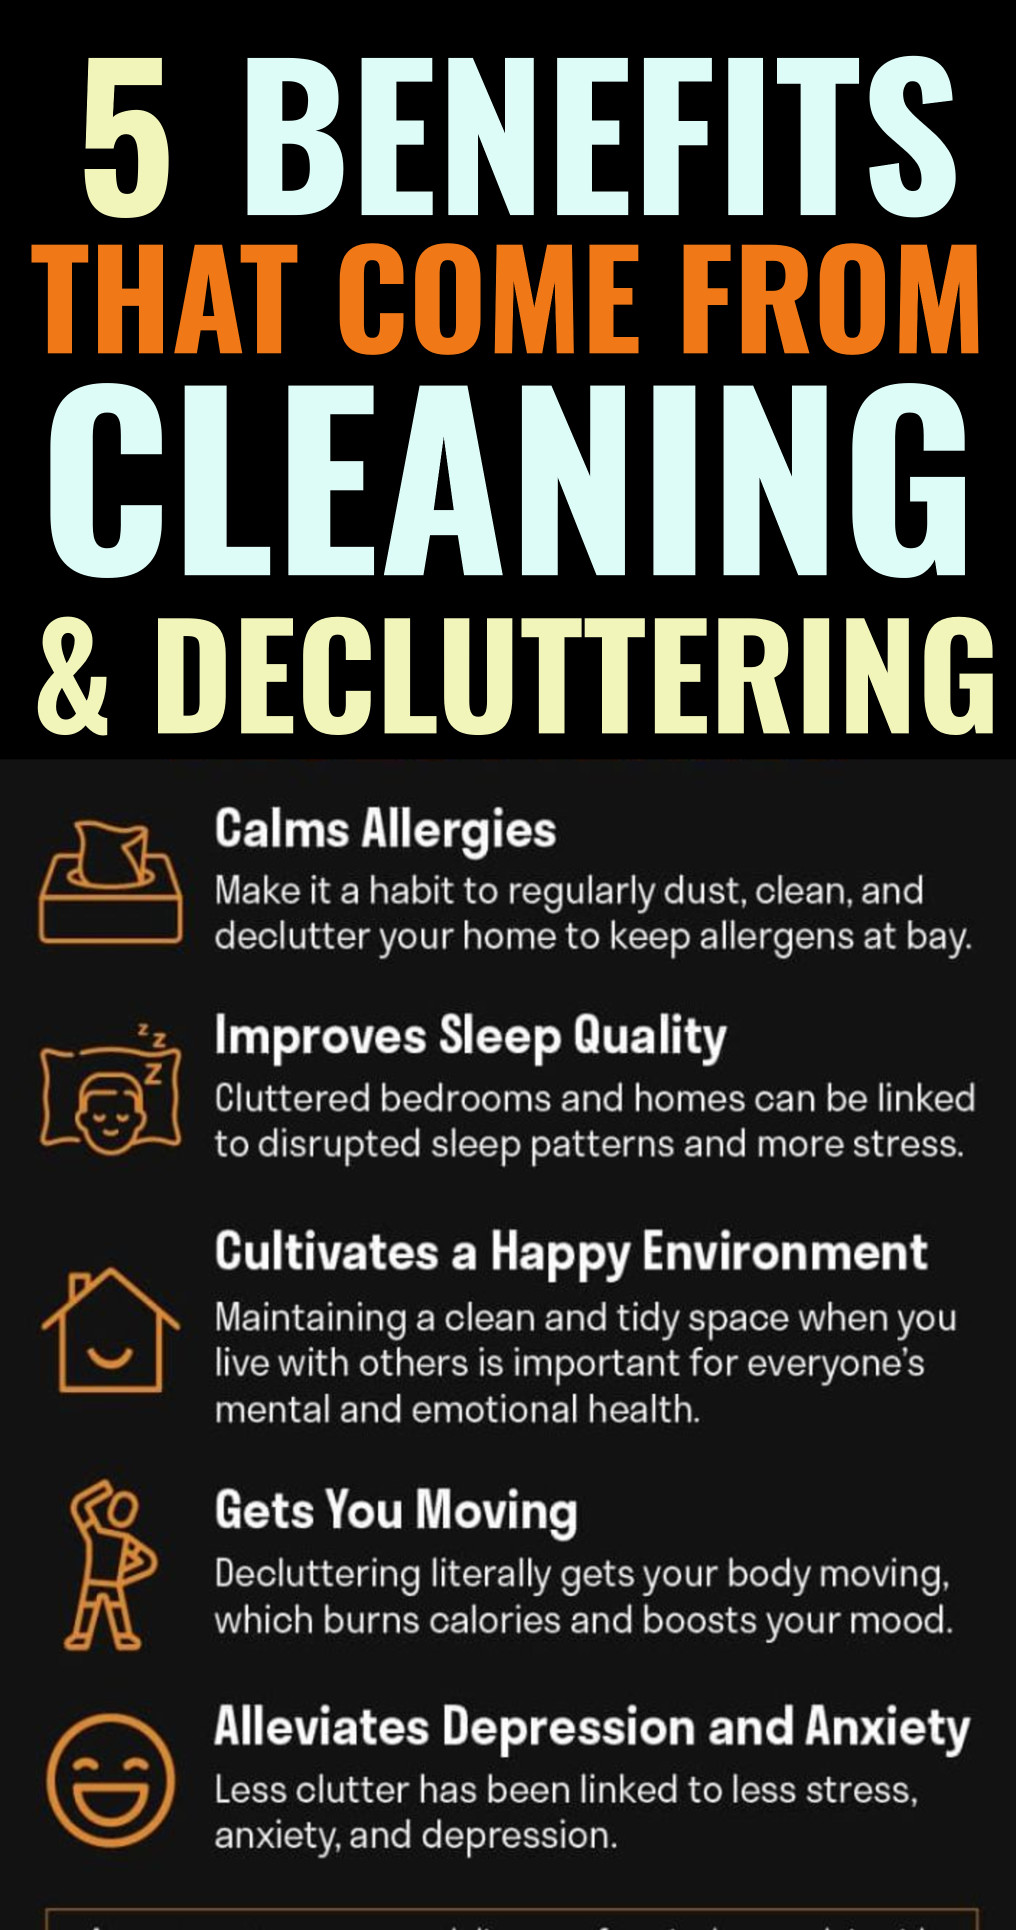 6 benefits that come from cleaning and decluttering